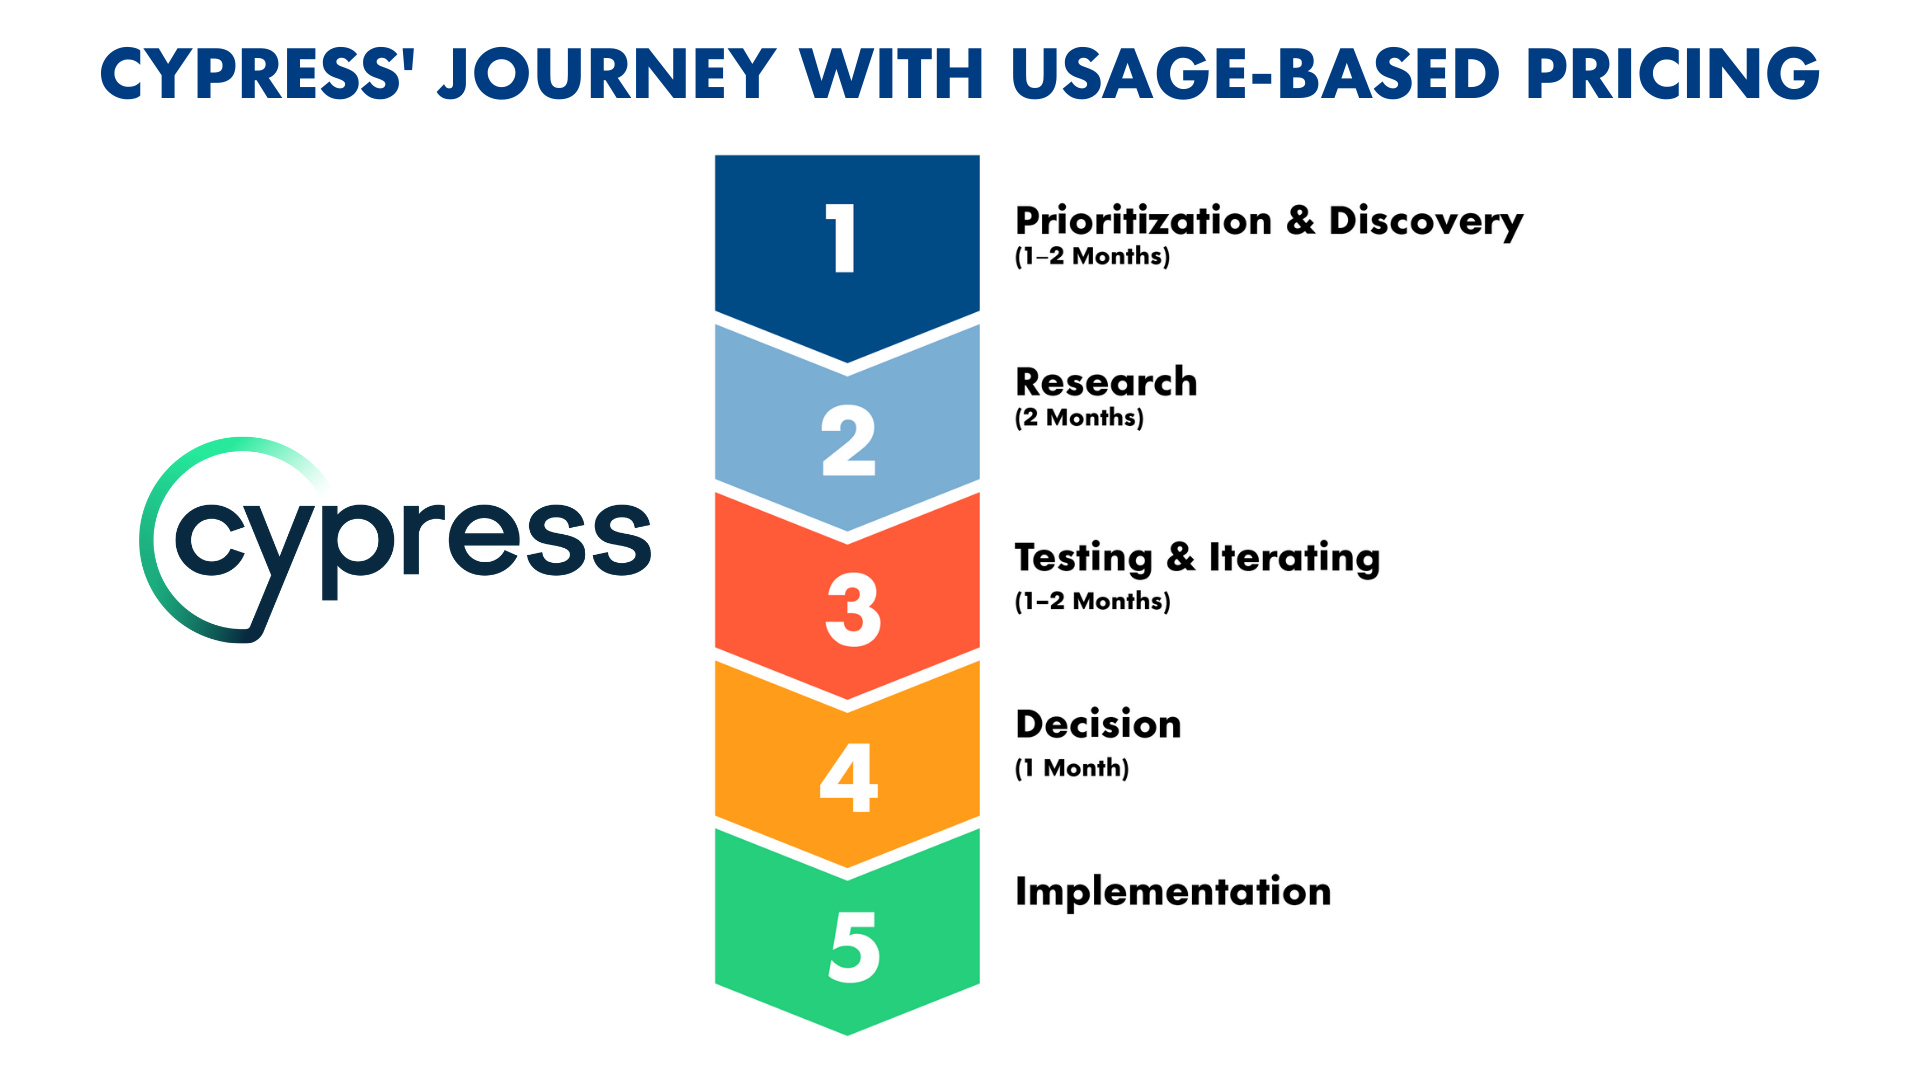 OpenView_Stories of Scaling with Usage-Based Pricing_Cypress UBP Journey